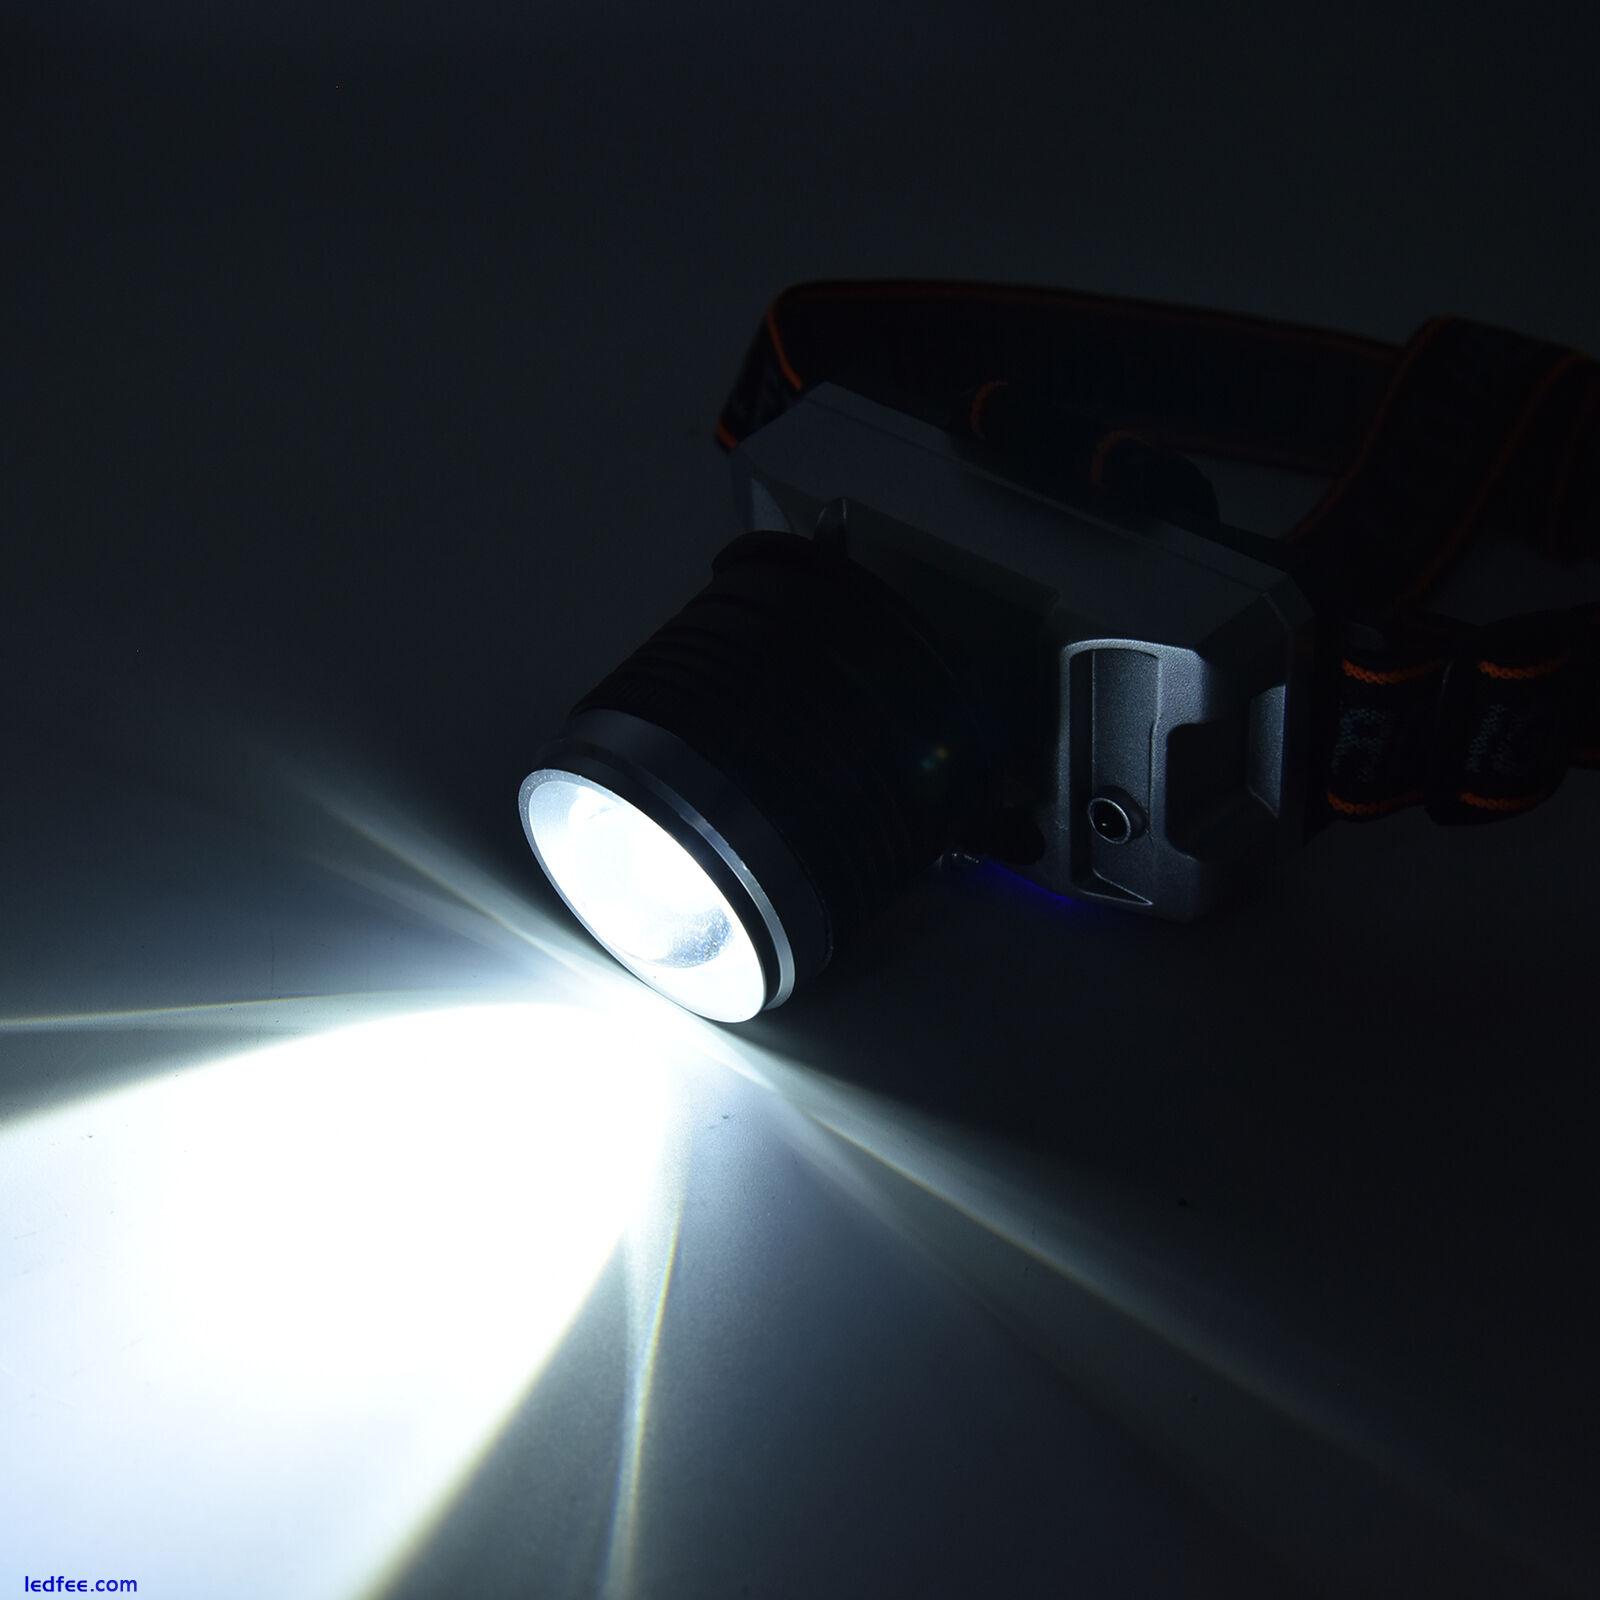 02 015 Zoomable Headlight LED Headlight USB Rechargeable Powerful Light 3 1 